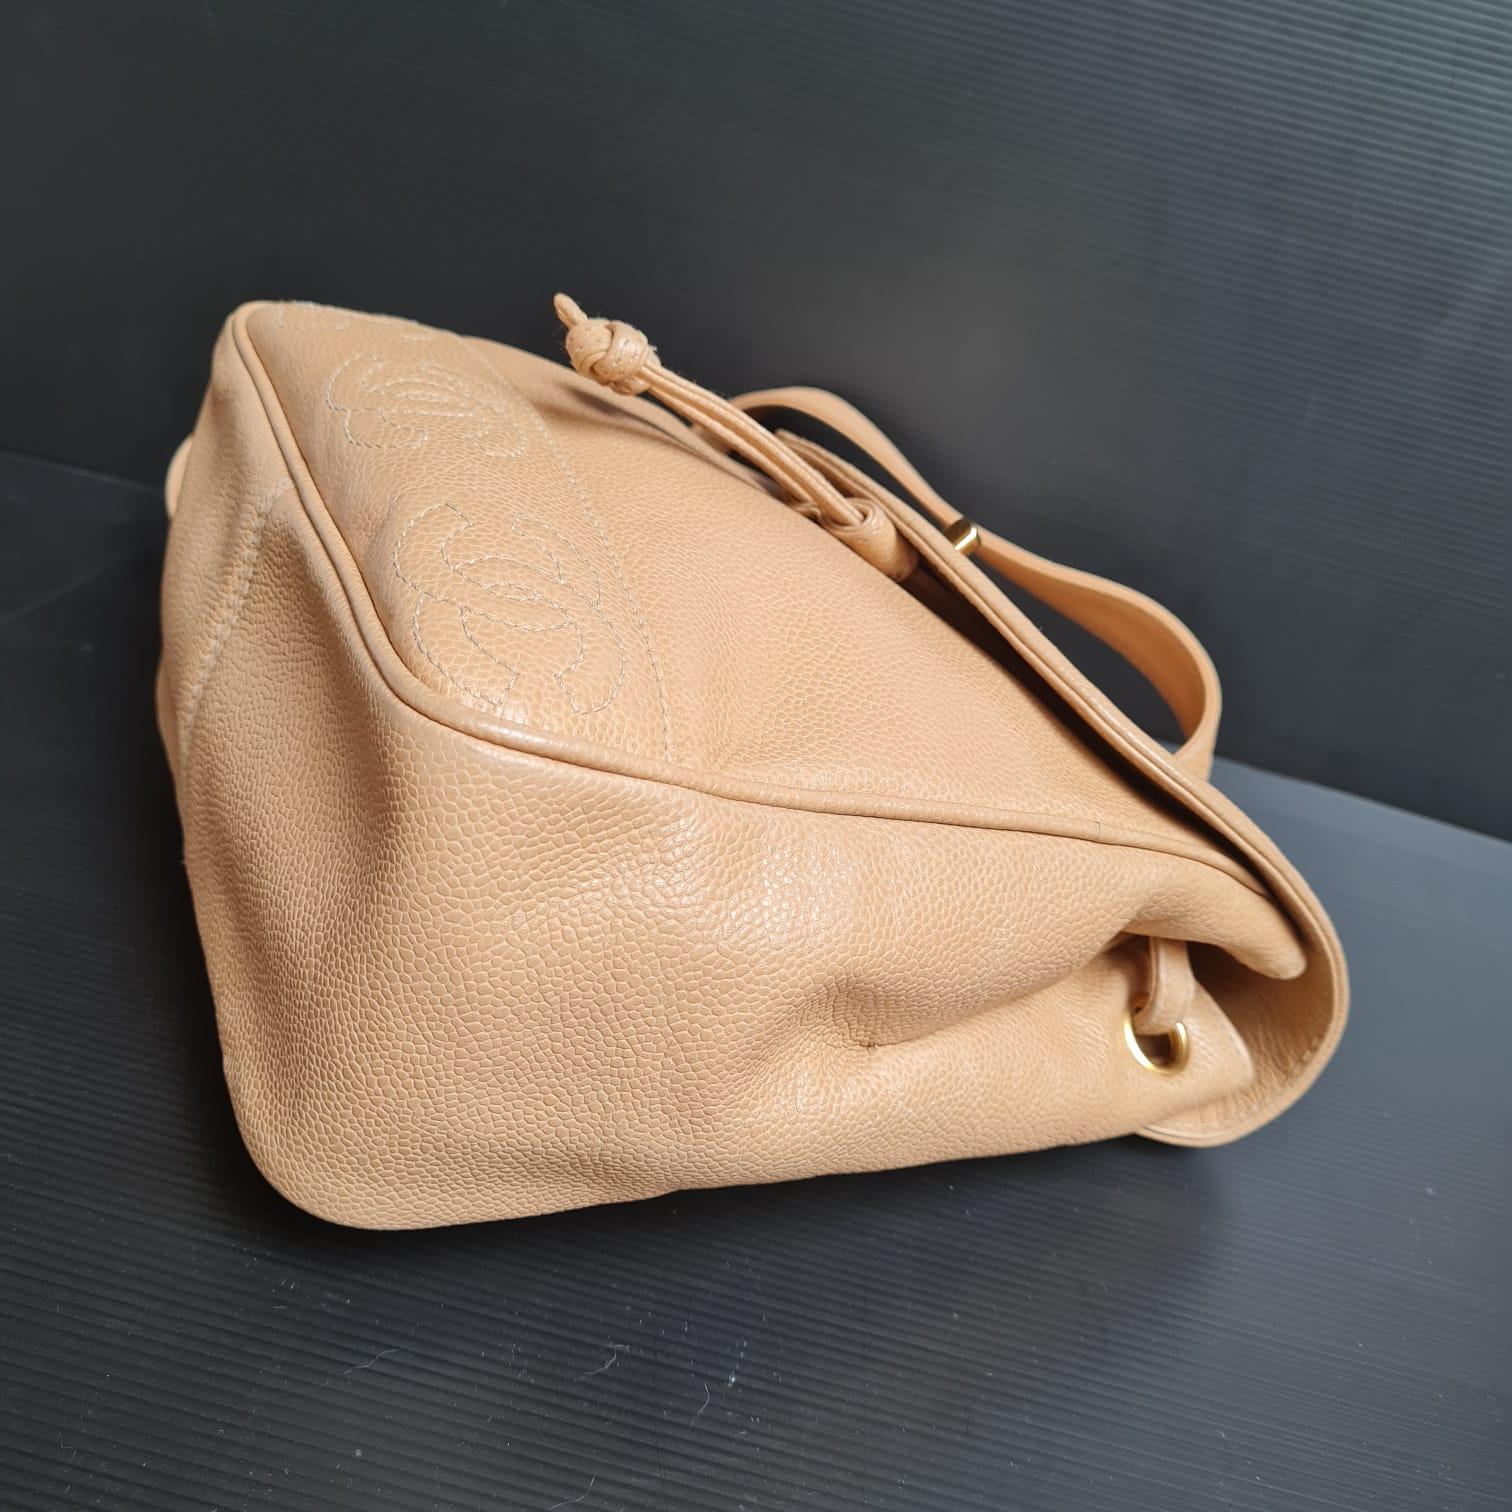 Rare vintage caviar backpack in beige. Small Size. Perfect for everyday or light travelling. 

Inclusion: Dust Bag

Serial Number: #3901032
